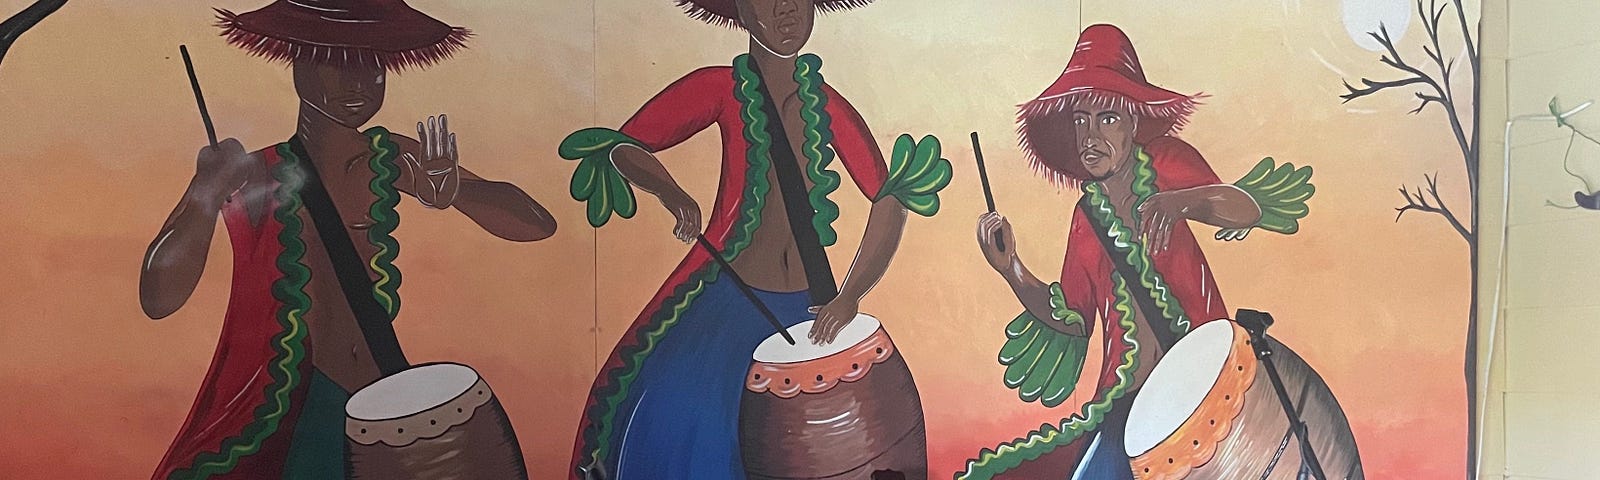 Mural depicting Costa Rican musicians on drums